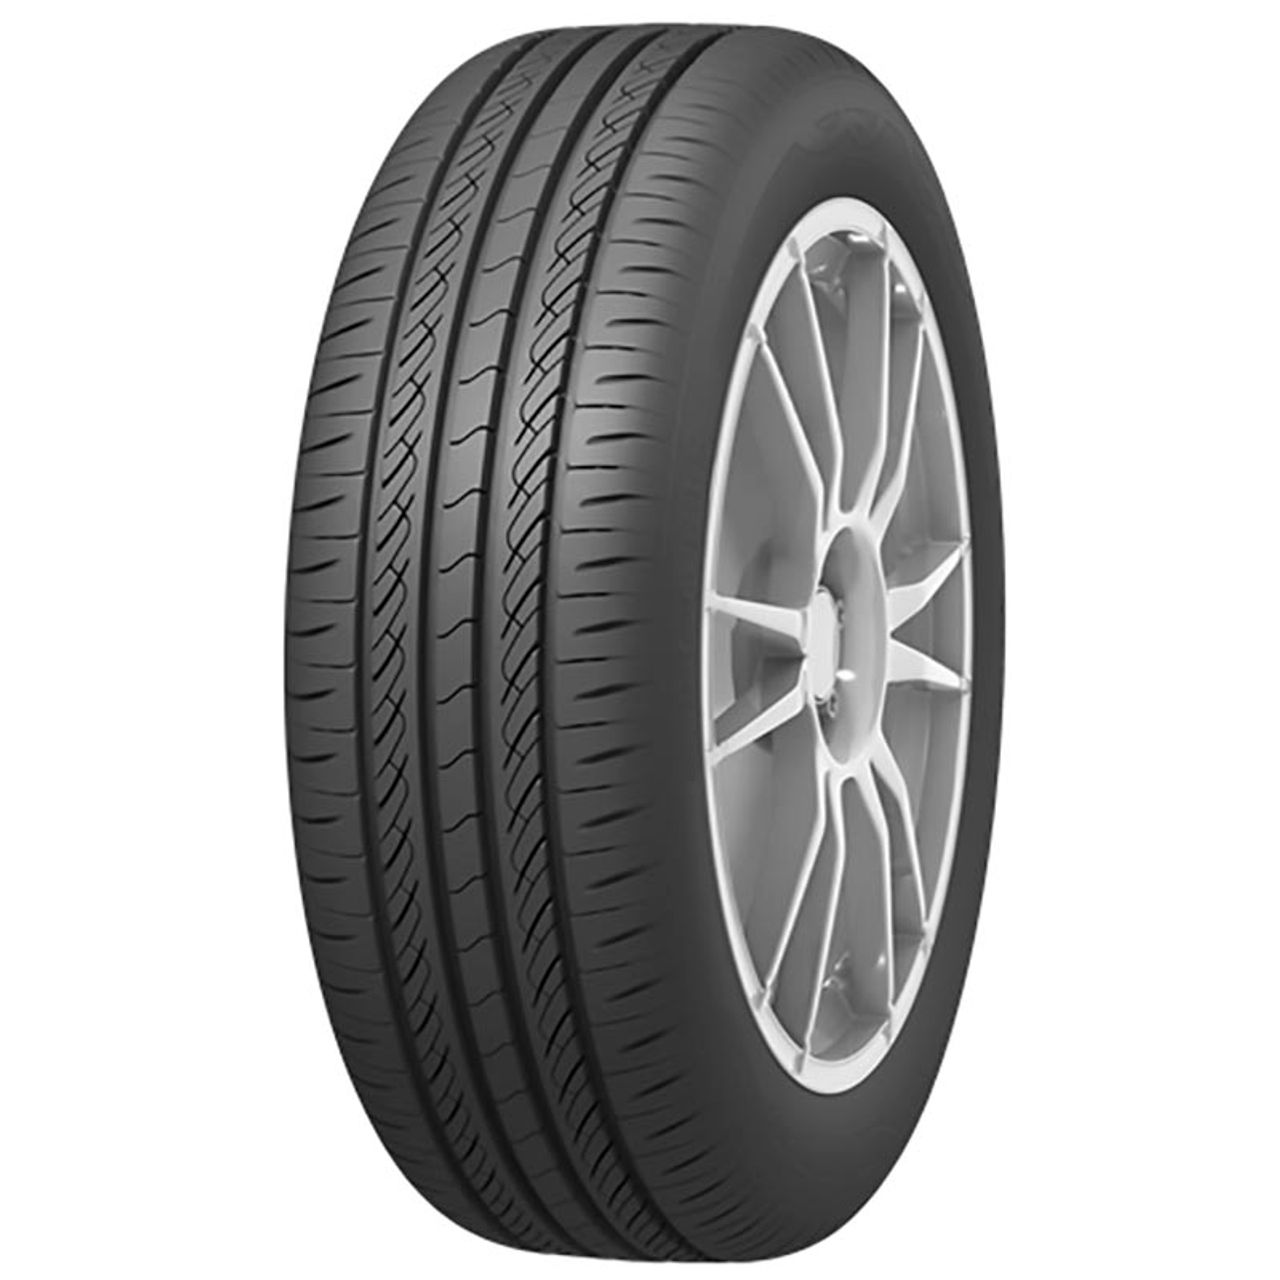 INFINITY ECOSIS 185/65R15 88H BSW